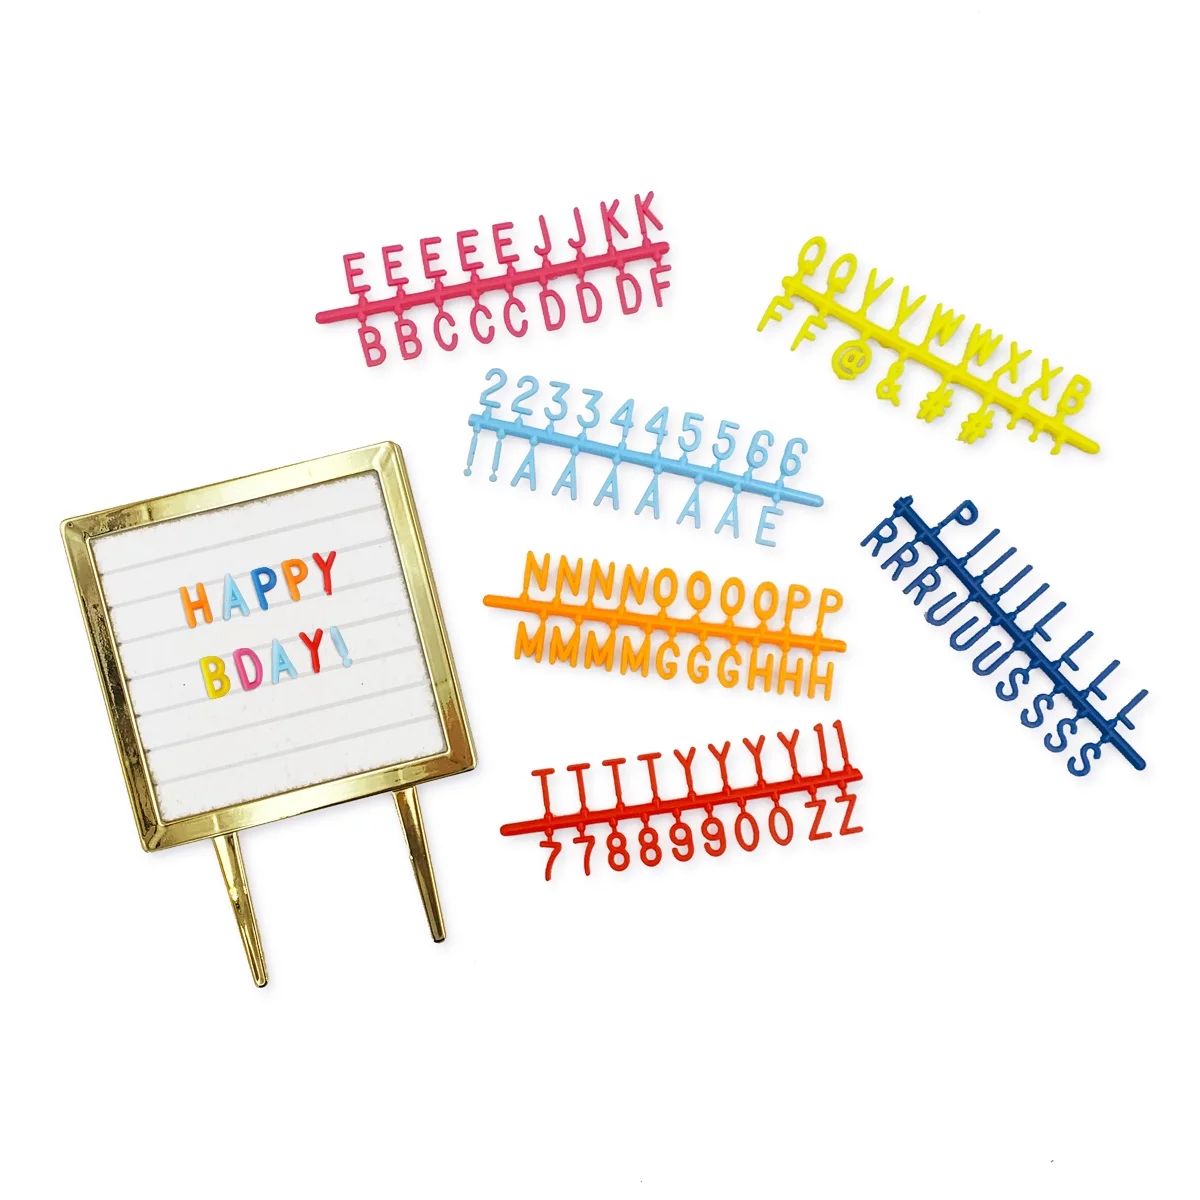 Packed Party 'Spell It Out' Customizable Letter Board Cake Topper, Birthday Cake Decoration | Walmart (US)